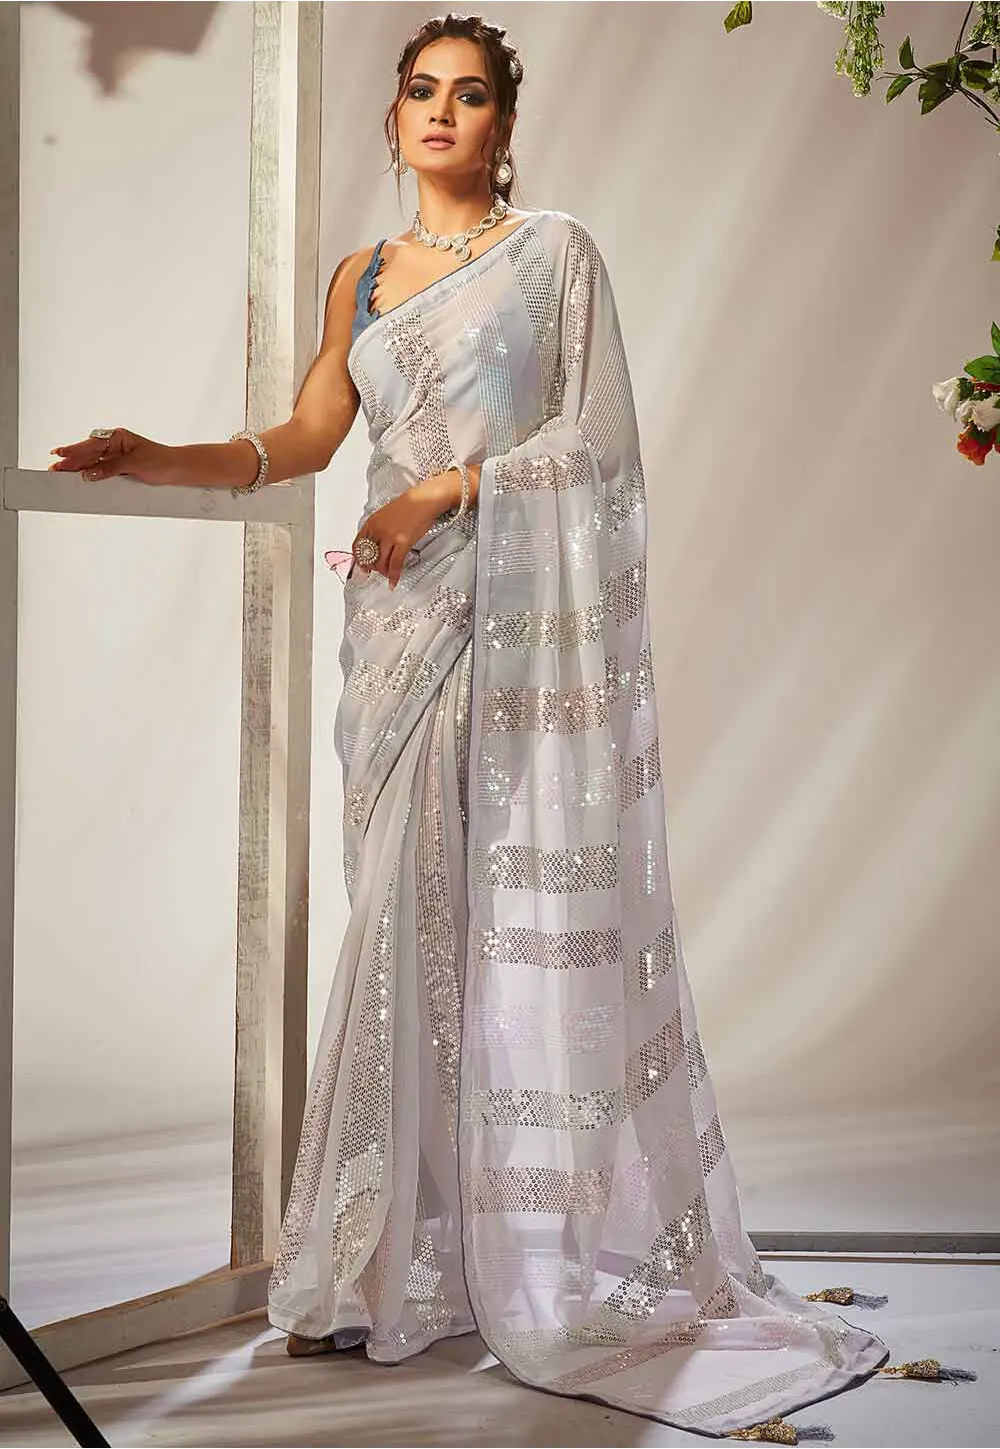 Buy Utsav Fashion Two Part Lycra Shimmer and Net Saree in Beige and Brown  at Amazon.in